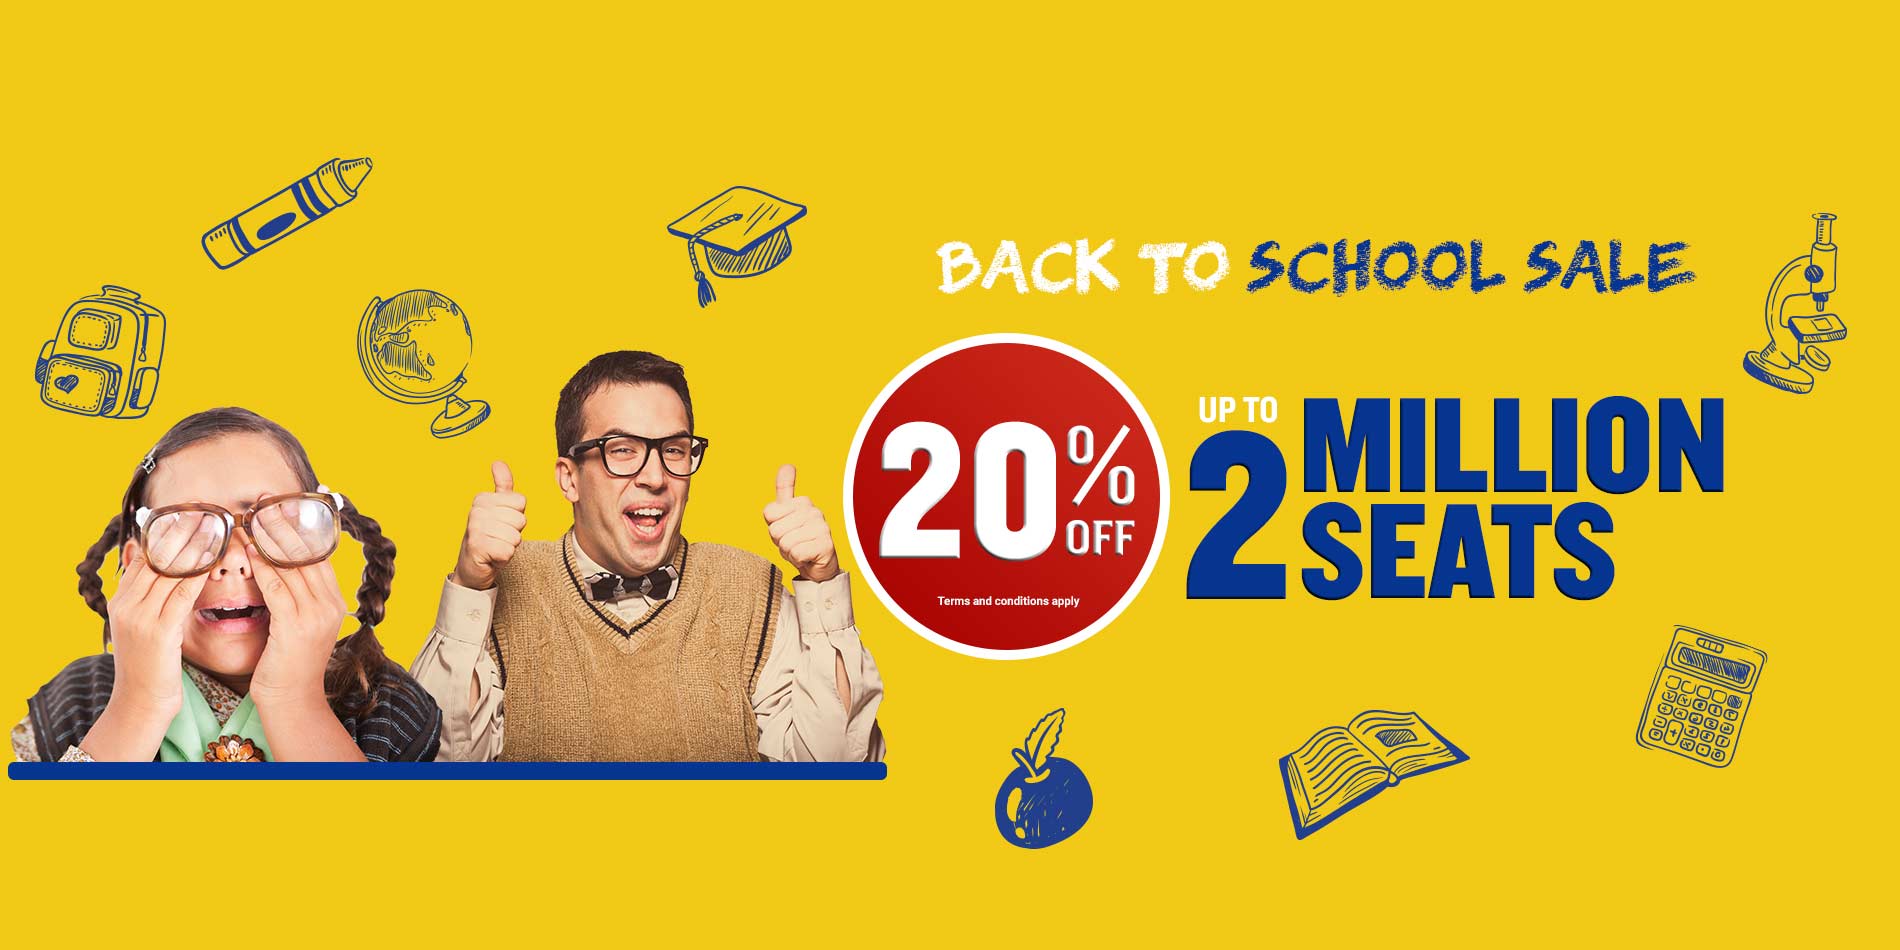 Massive Back To School Seat Sale Launched – 20% Off Up To 2 Million Seats From November-January